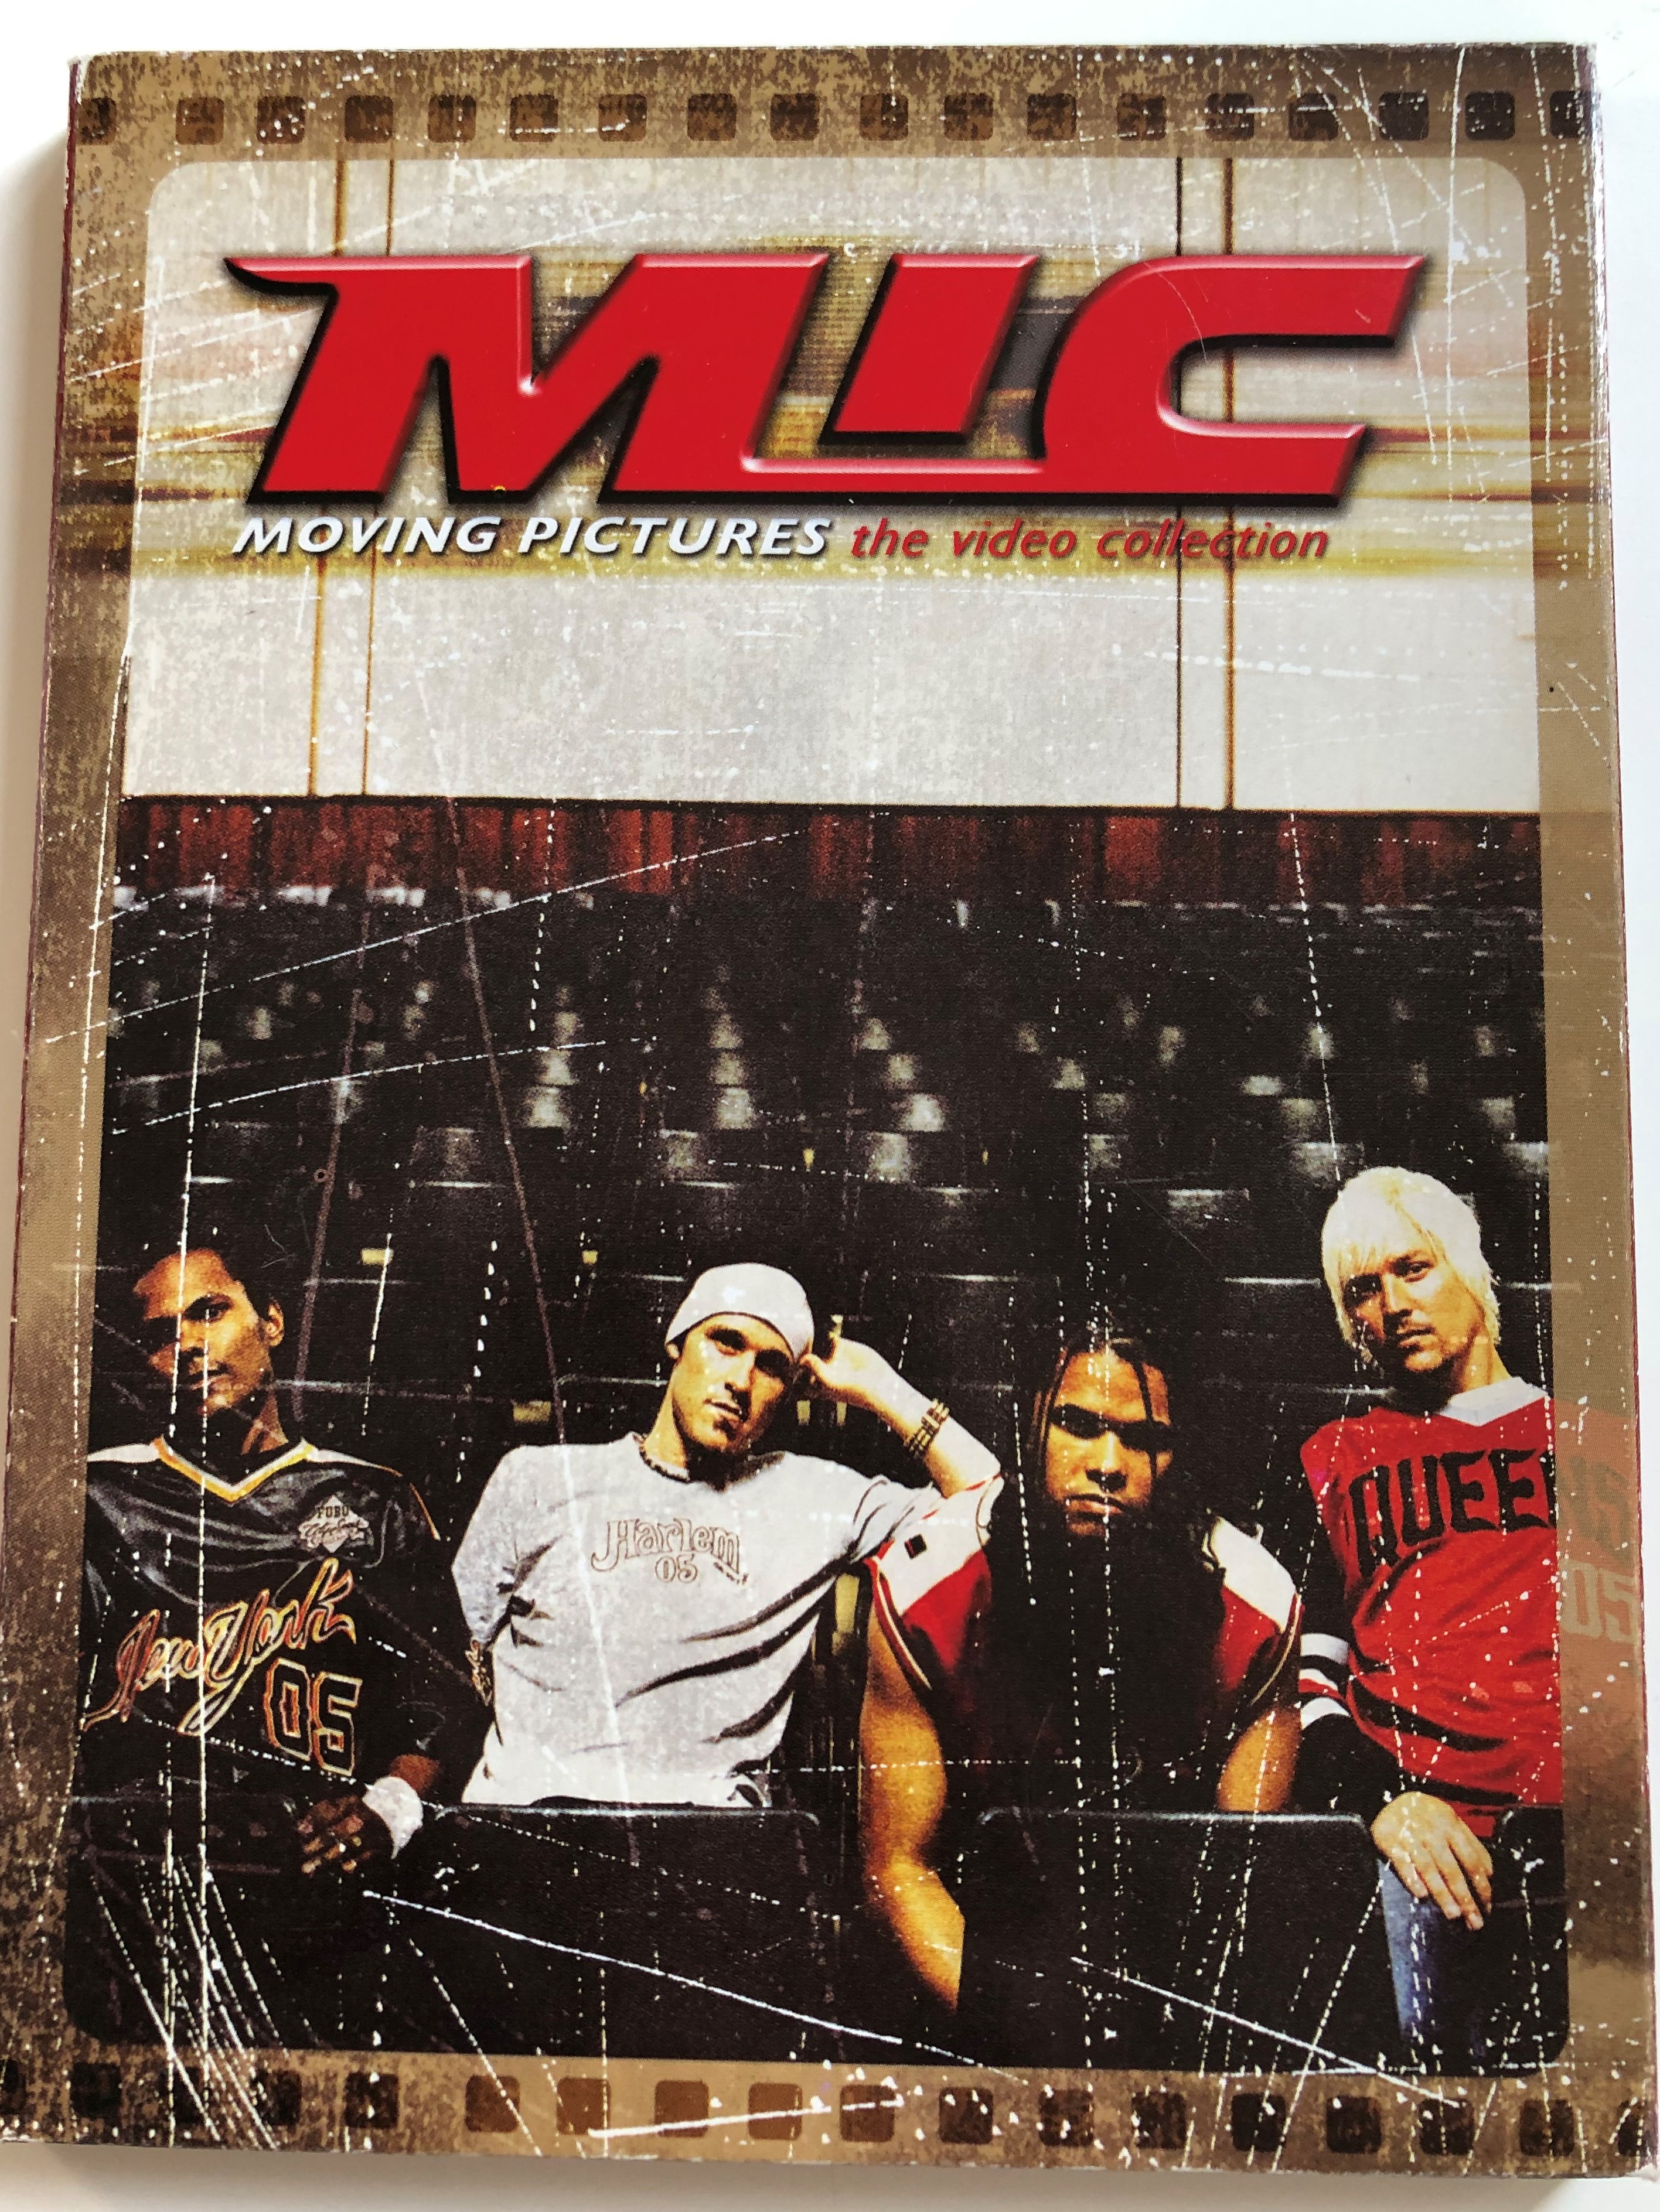 mic-moving-pictures-the-video-collection-dvd-2005-1.jpg